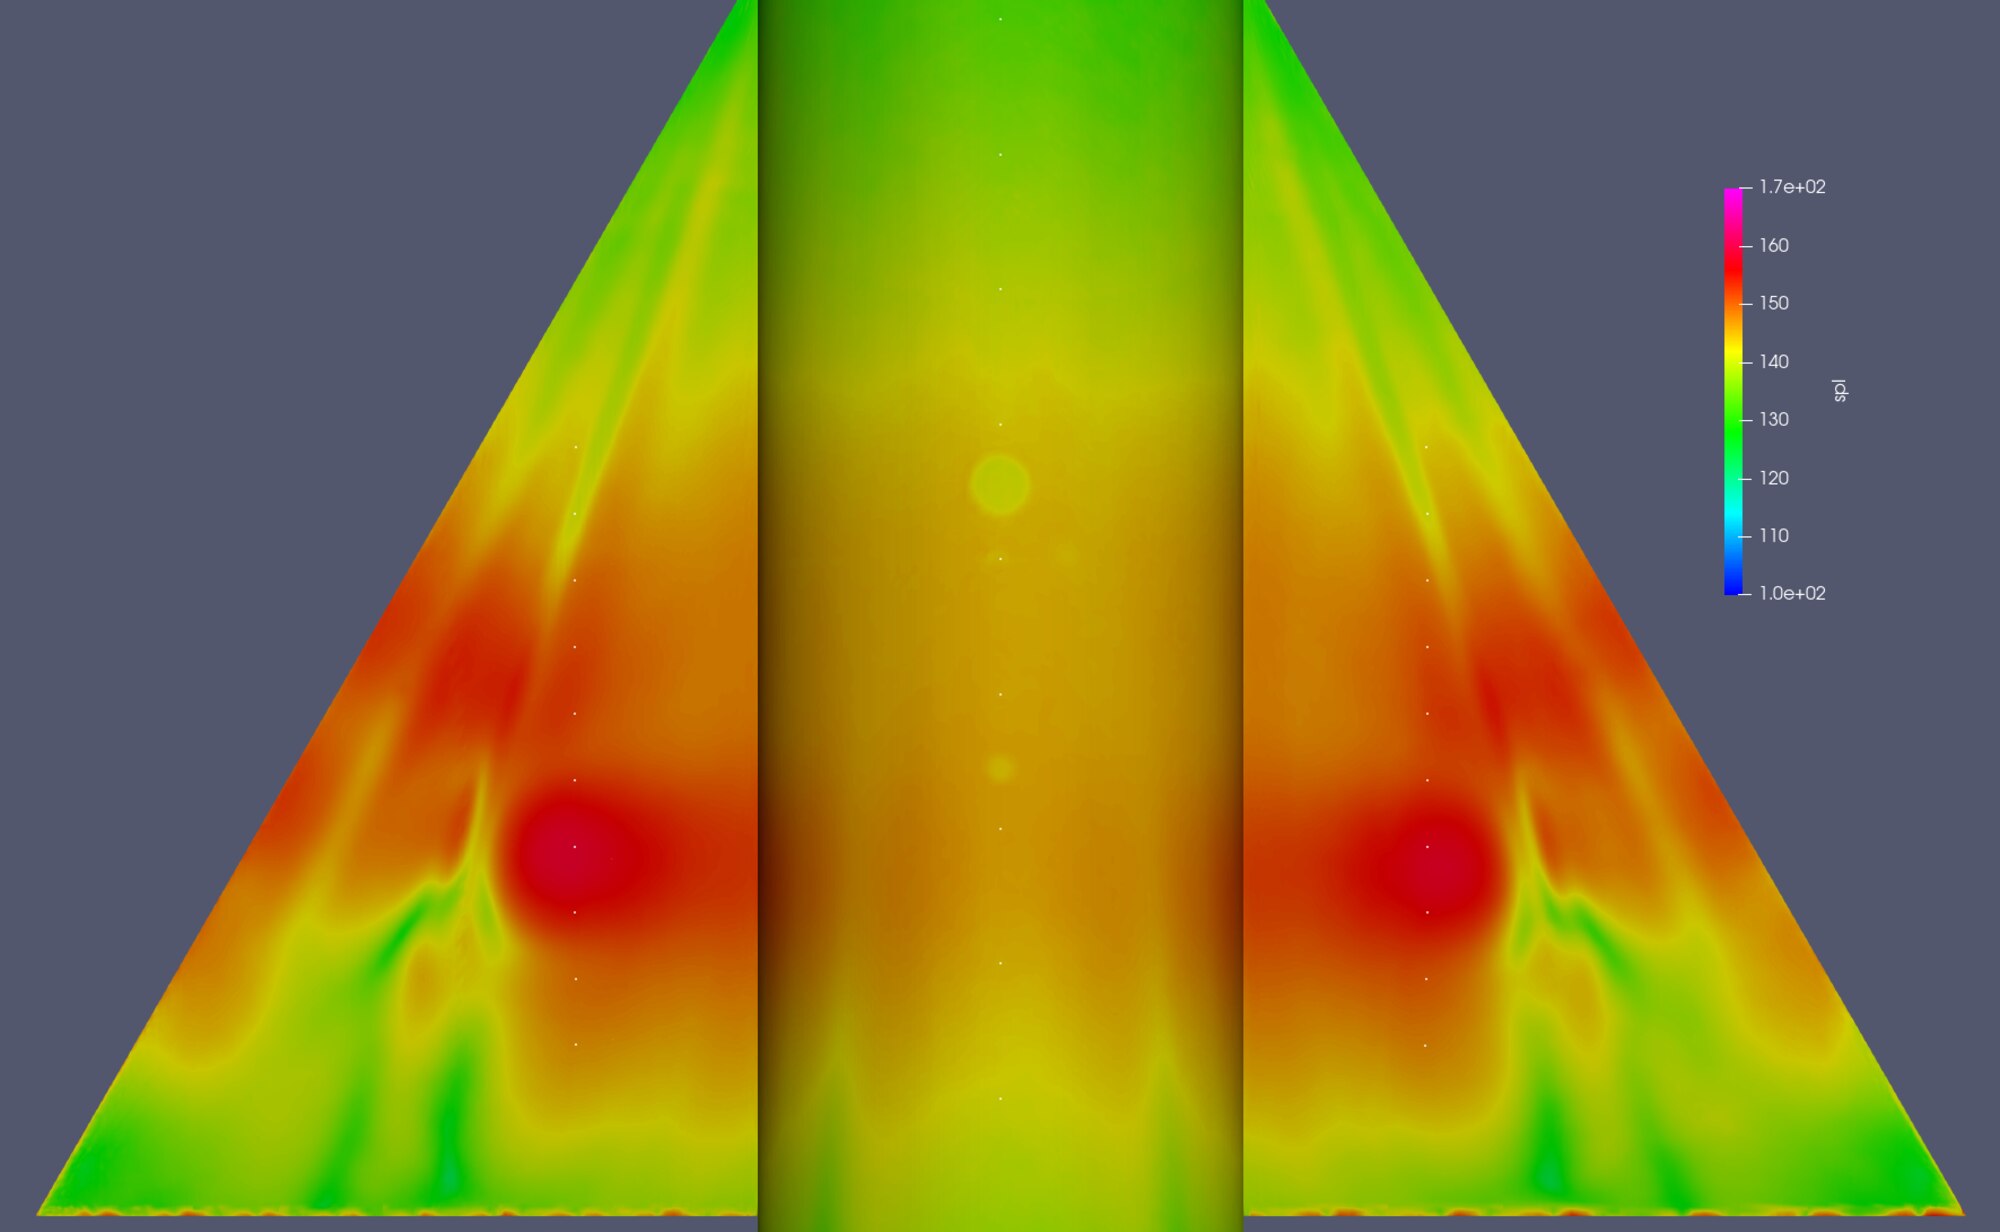 This image shows the Sound Pressure Level distribution at 53.7 hertz frequency at Mach 0.8, Alpha 15 degrees on an AGARD-C model.